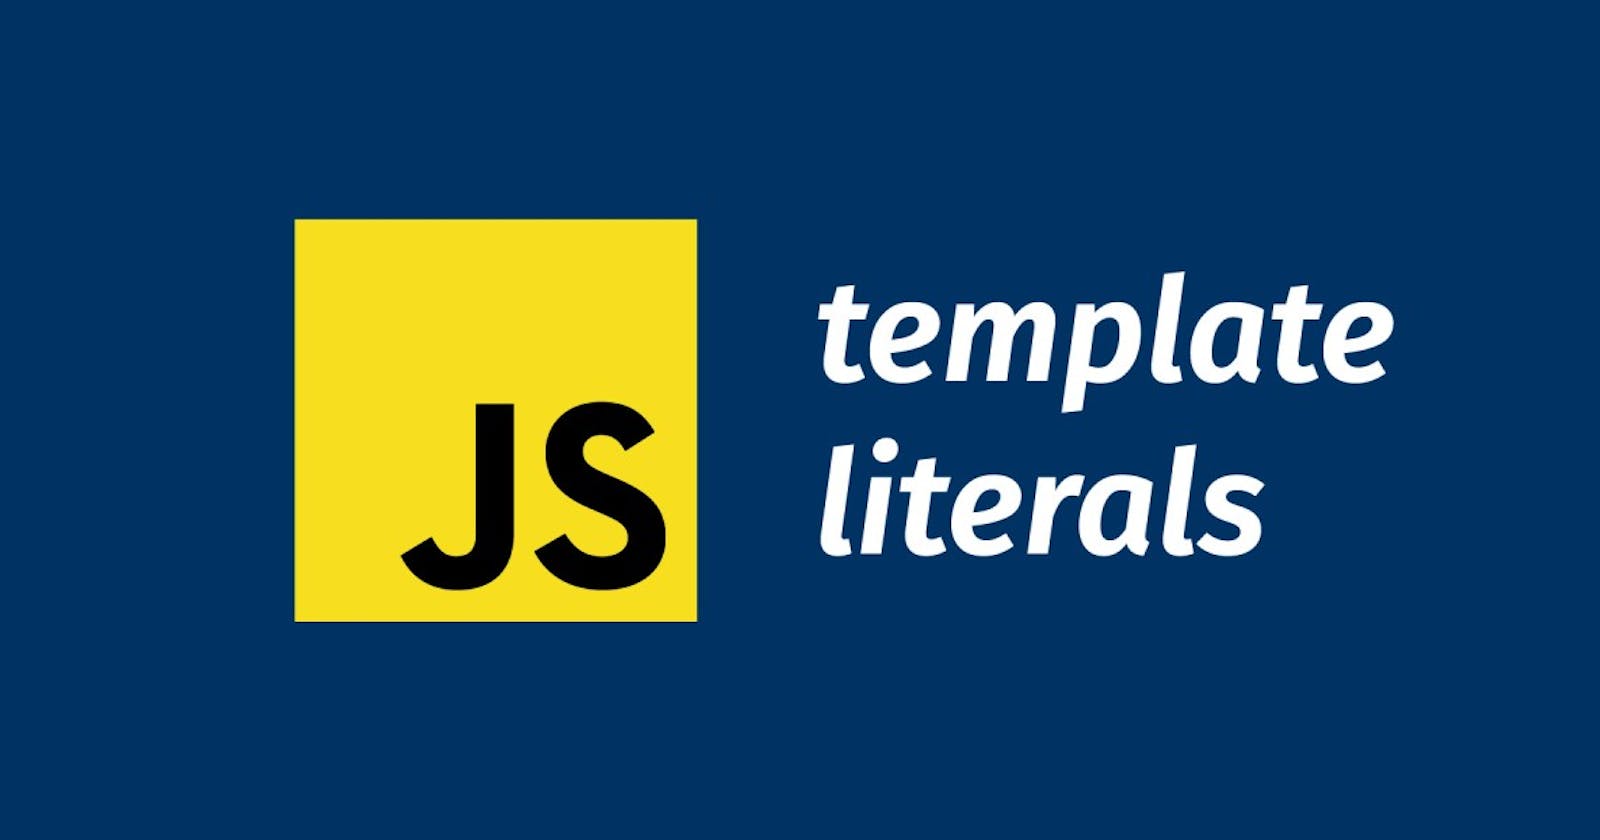 How to Use Template Literals in JavaScript